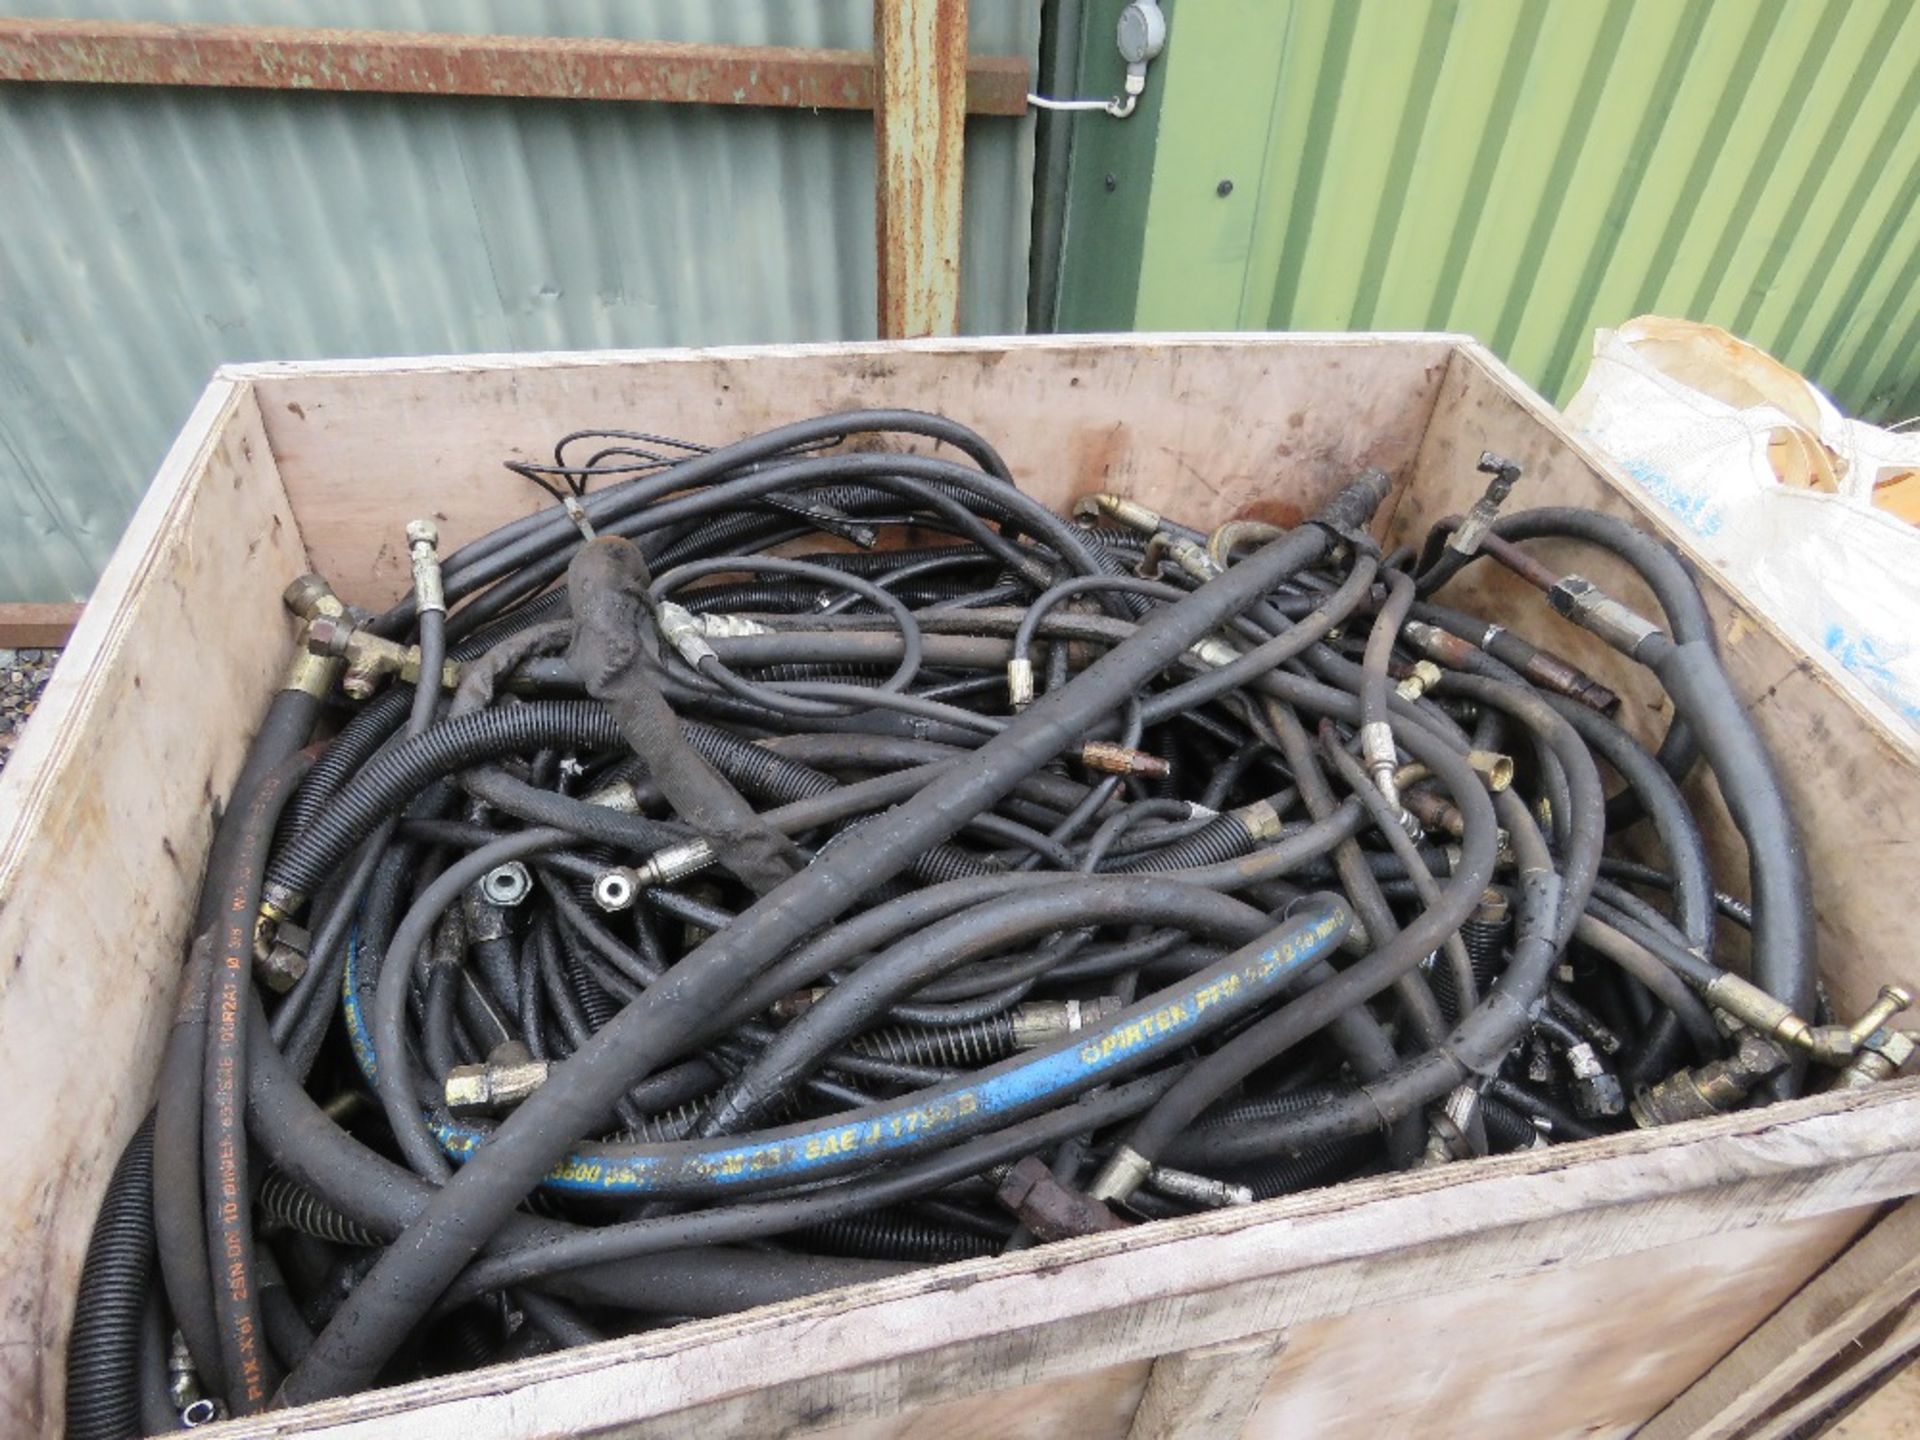 STILLAGE CONTAINING A LARGE QUANTITY OF ASSORTED HYDRAULIC HOSES.